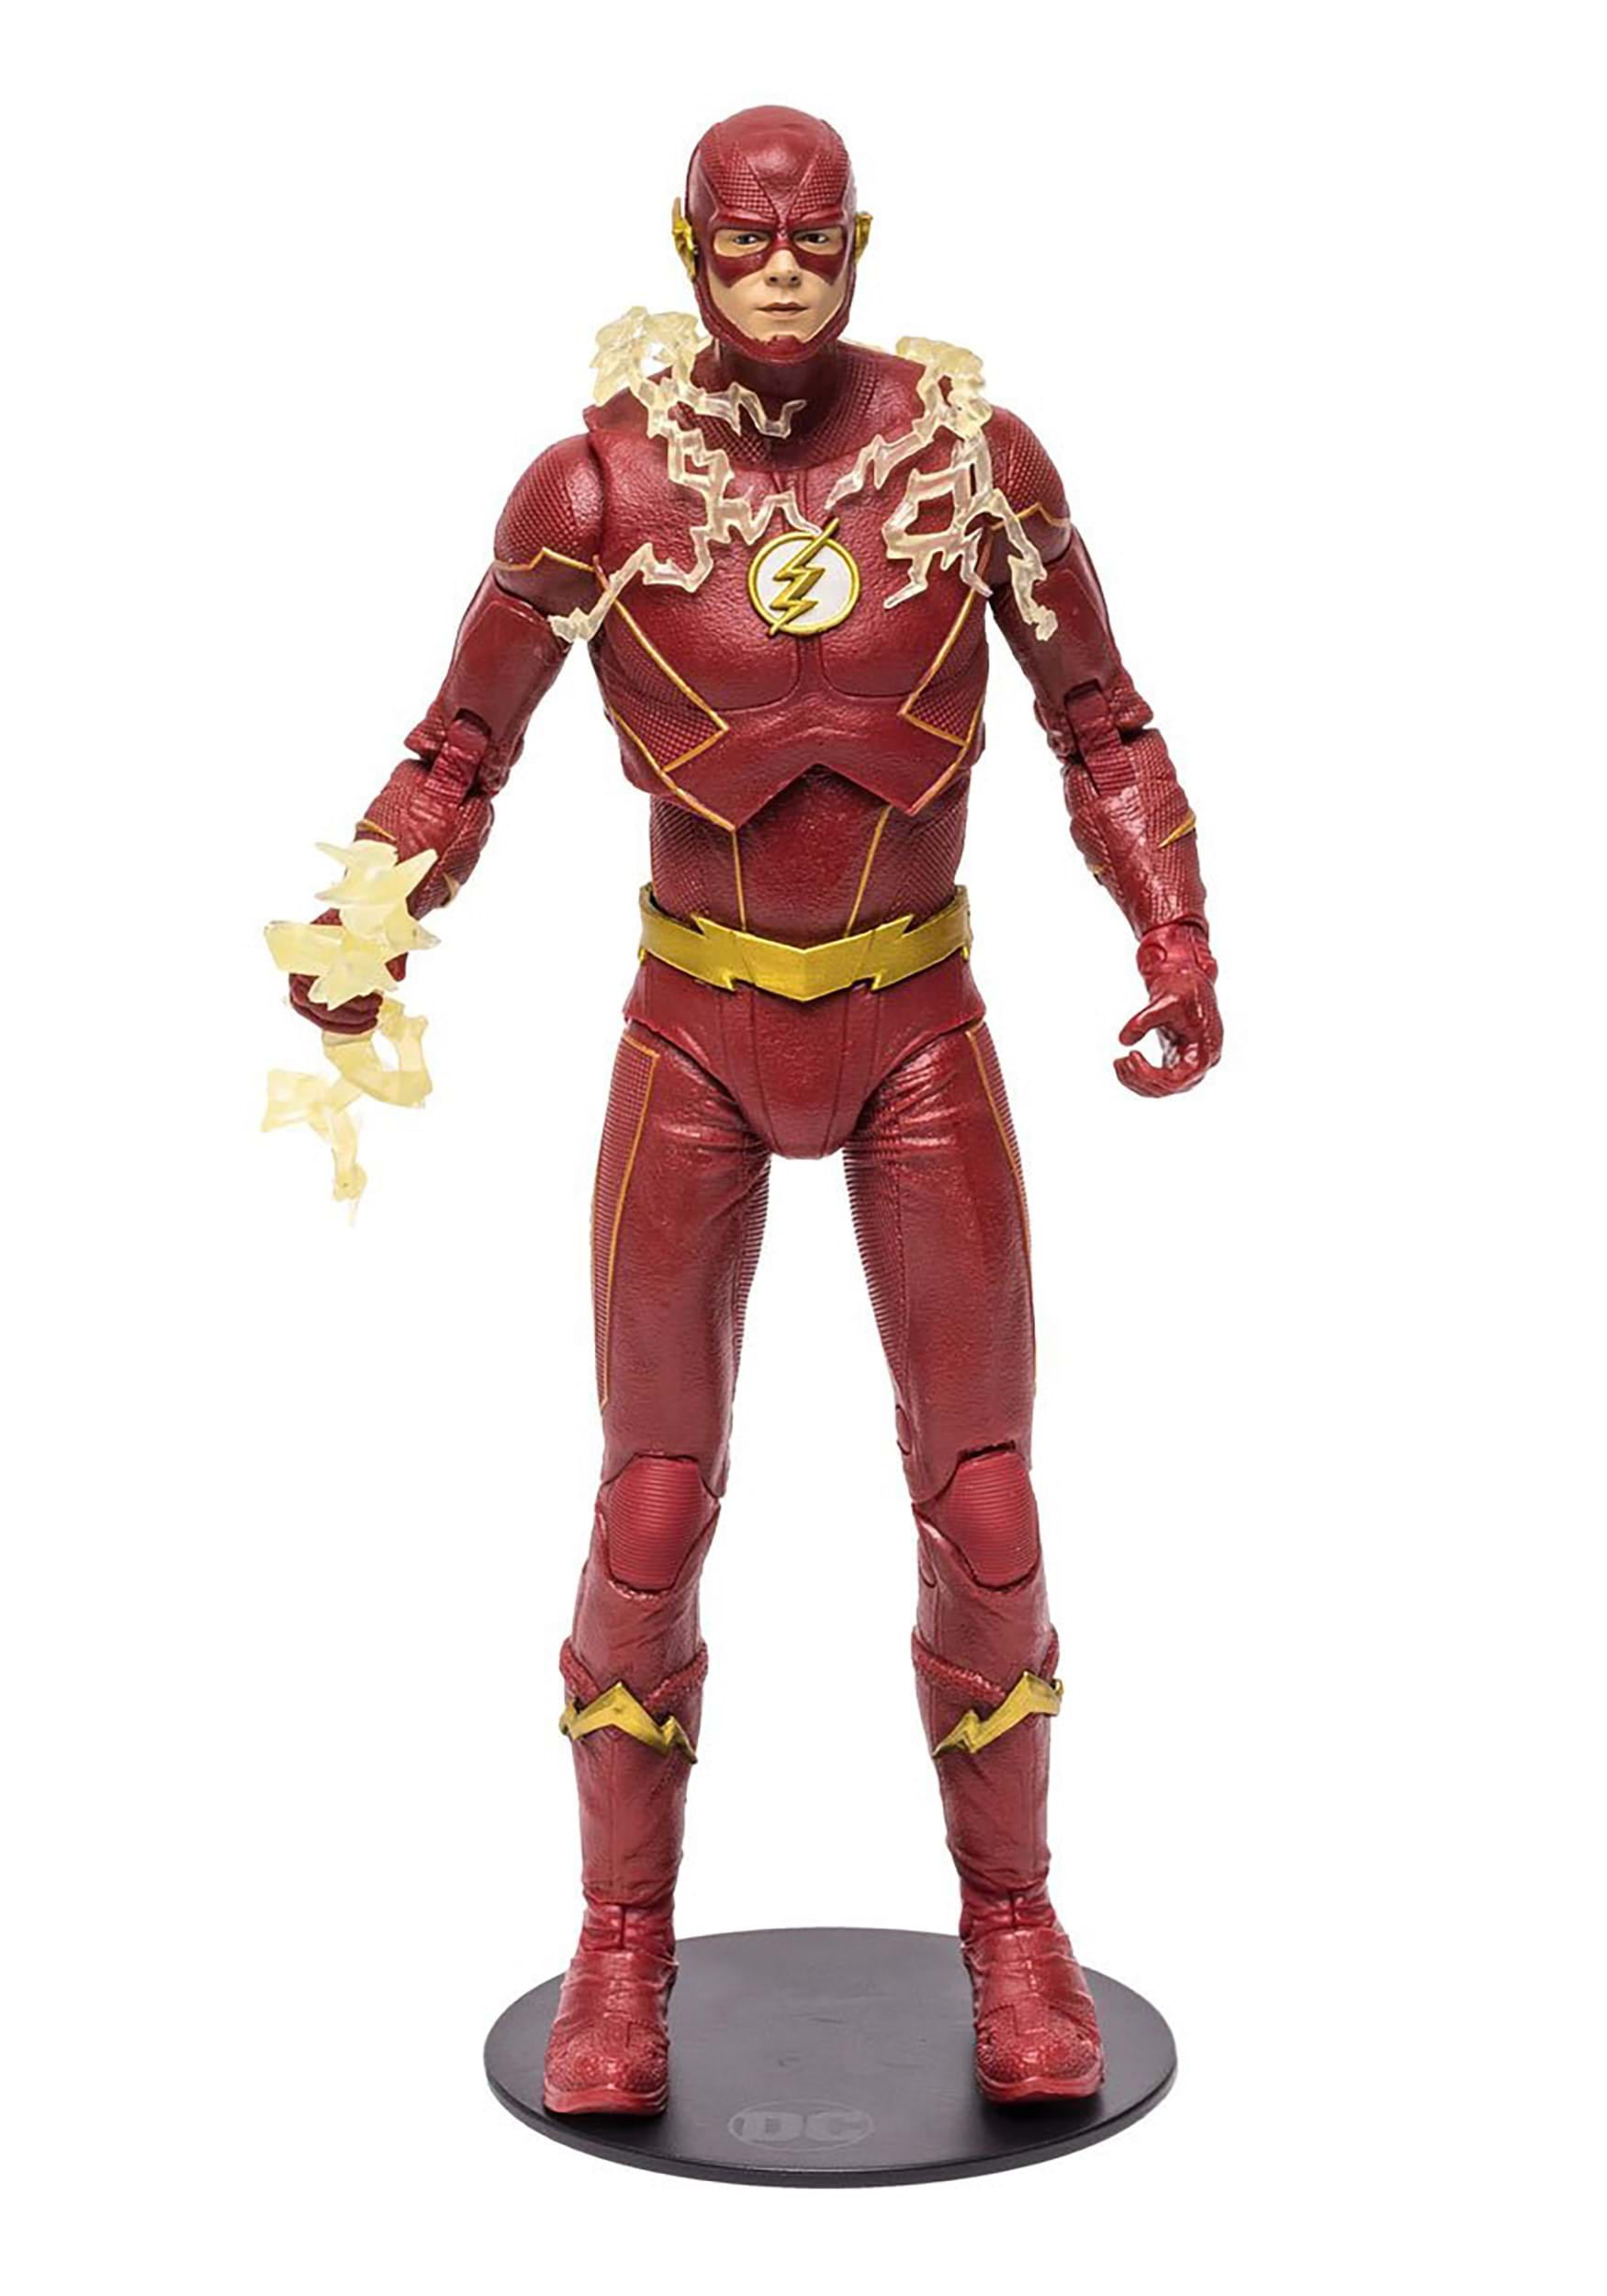 The Flash Barry Allen Superhero Justice League Action Figure Doll Kid's Toy Gift 